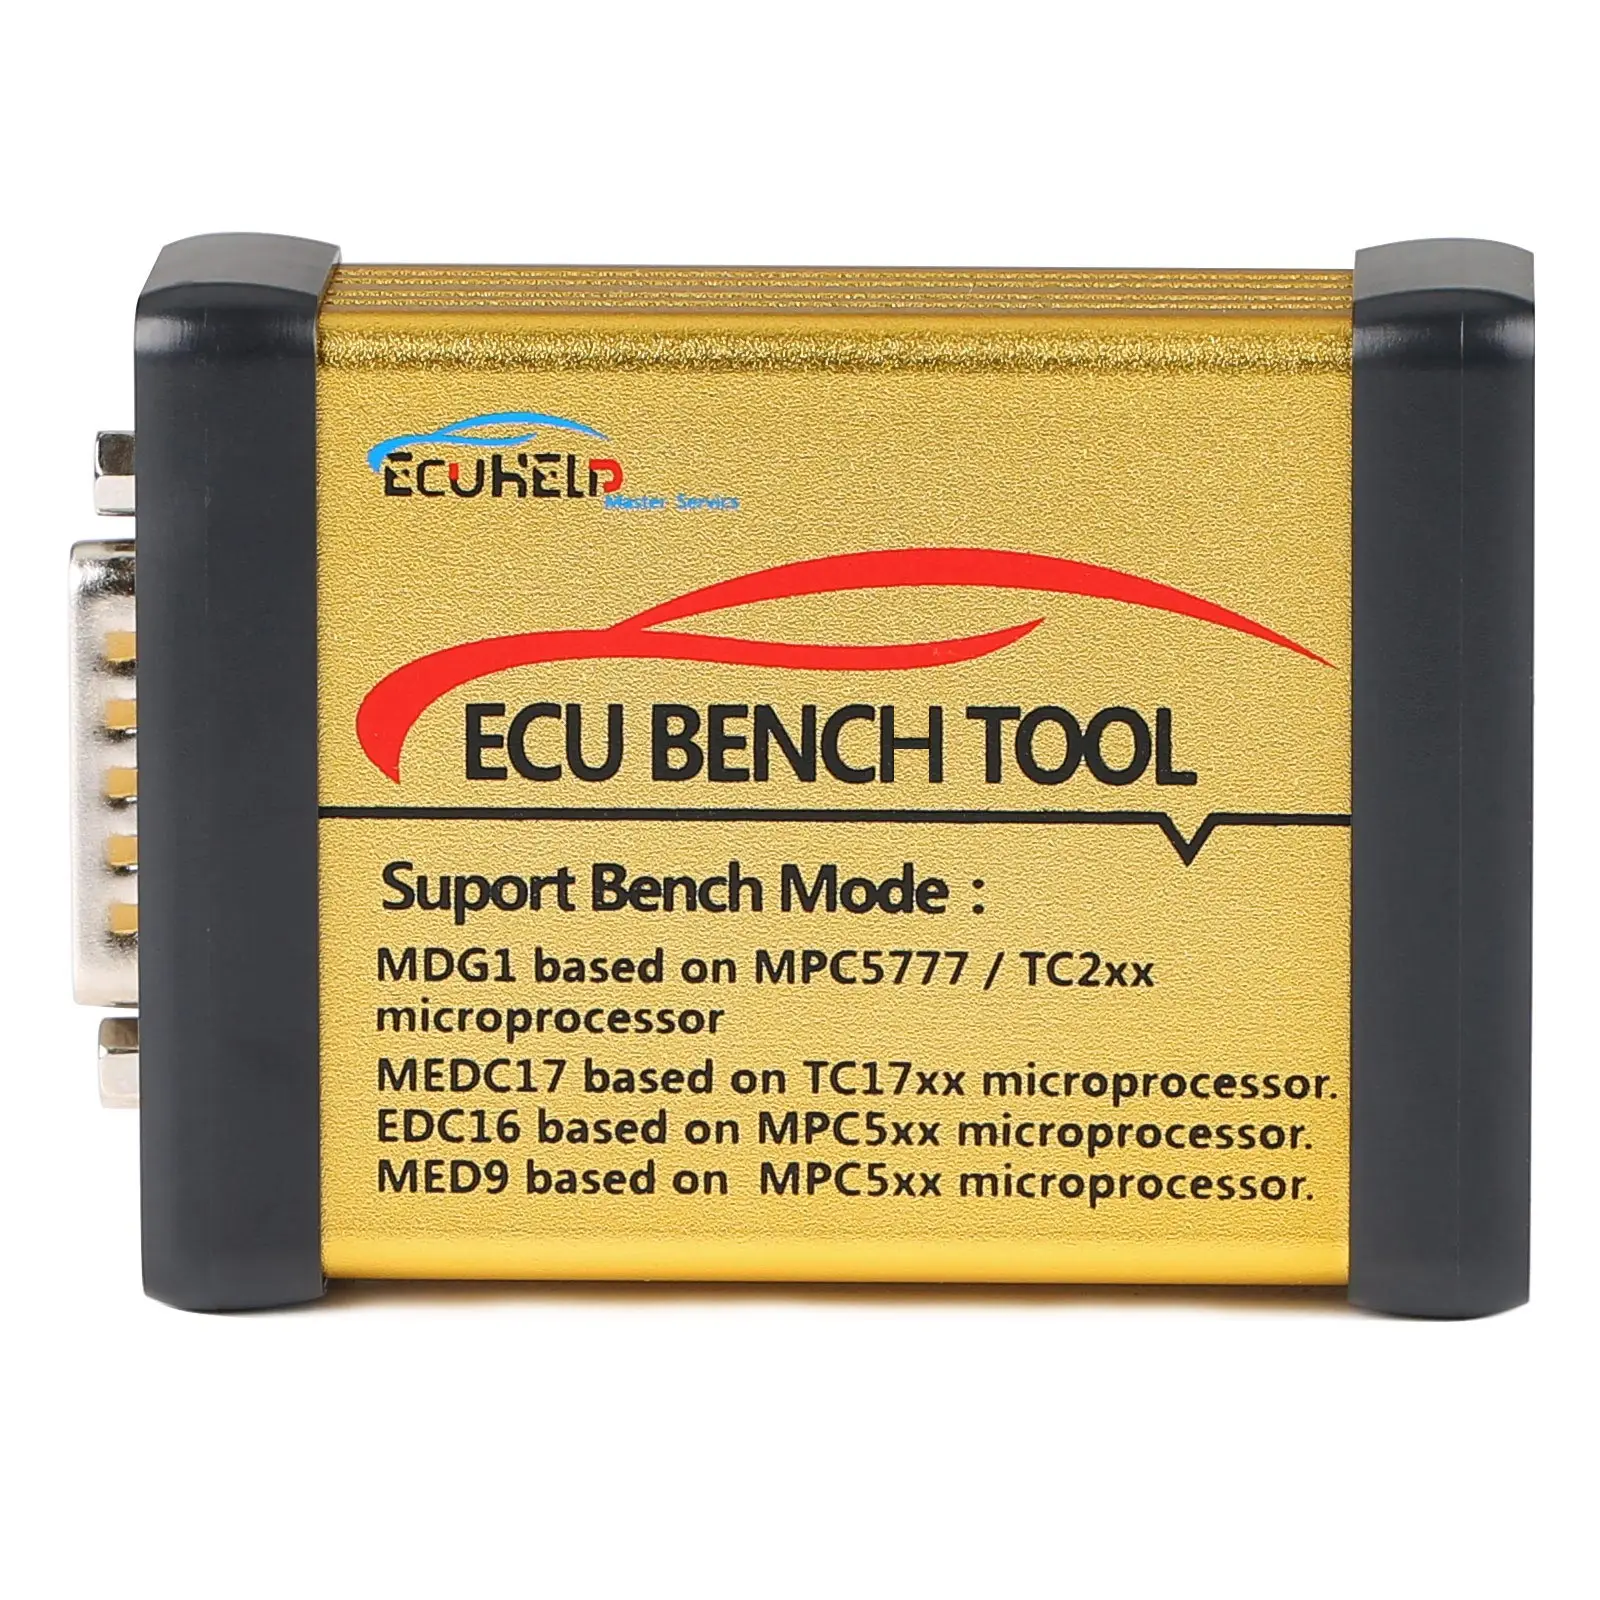 

2022 ECUHELP ECU Bench Tool Support For BoschMDG1/EDC16 and MG1 MD1 Protocol PK Pcmtuner